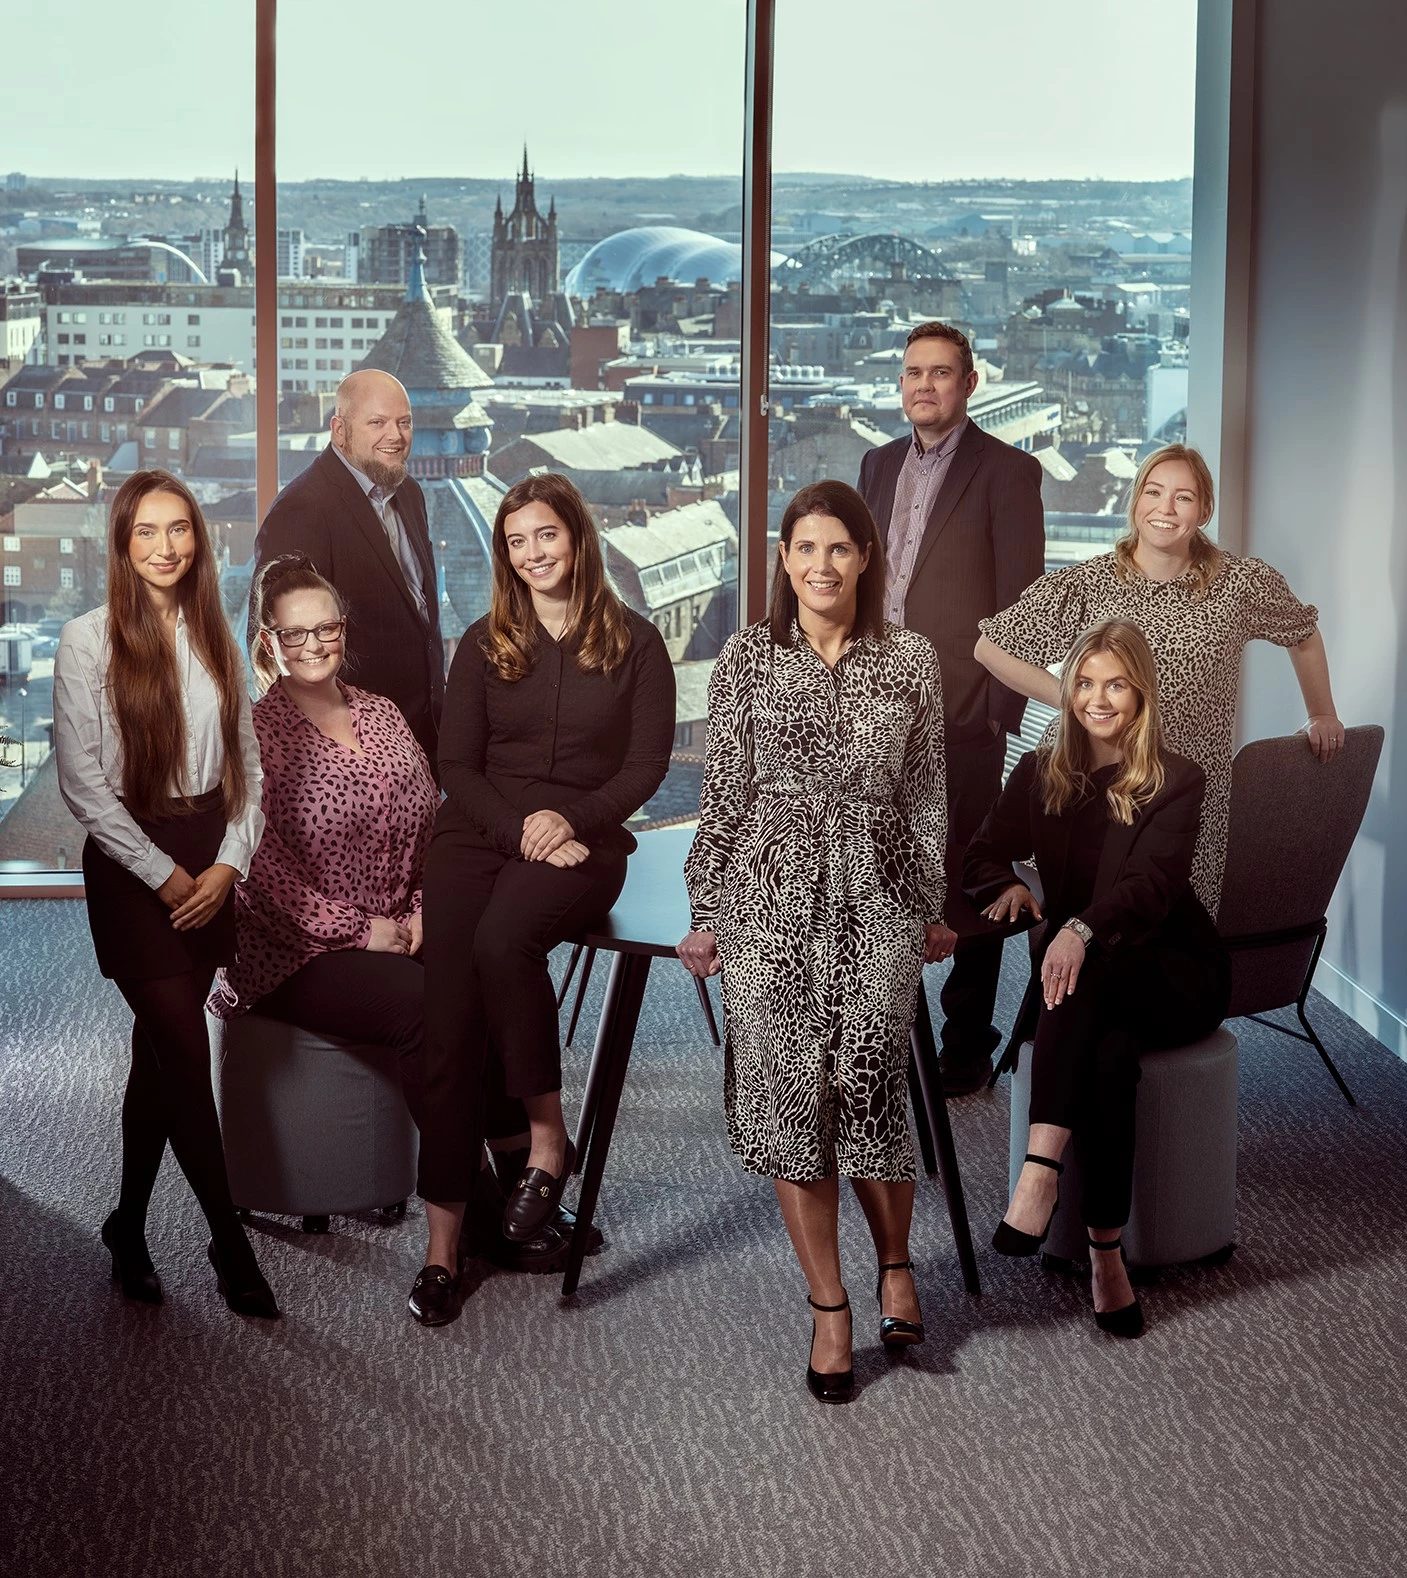 The commercial property team at Hay & Kilner